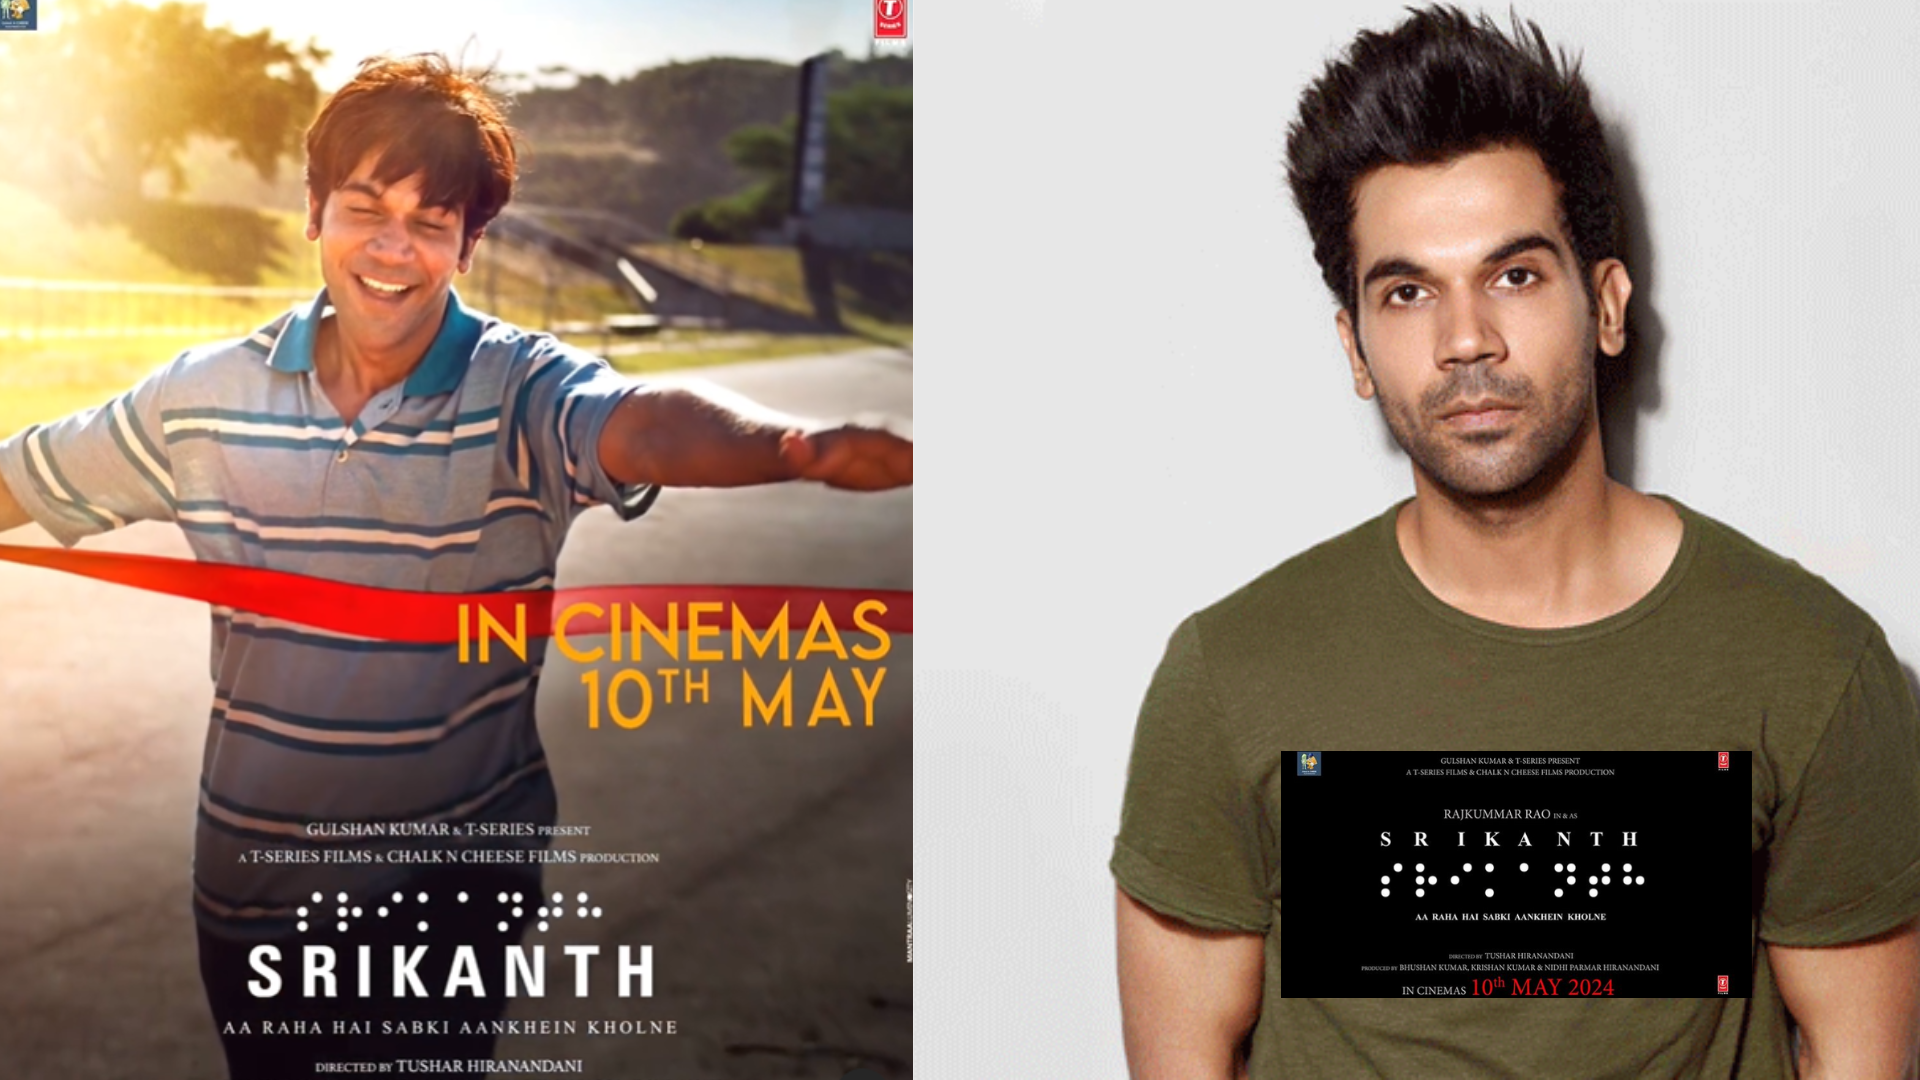 Rajkummar Rao unveils first look of ‘Srikanth’ biopic, set to hit screens on May 10